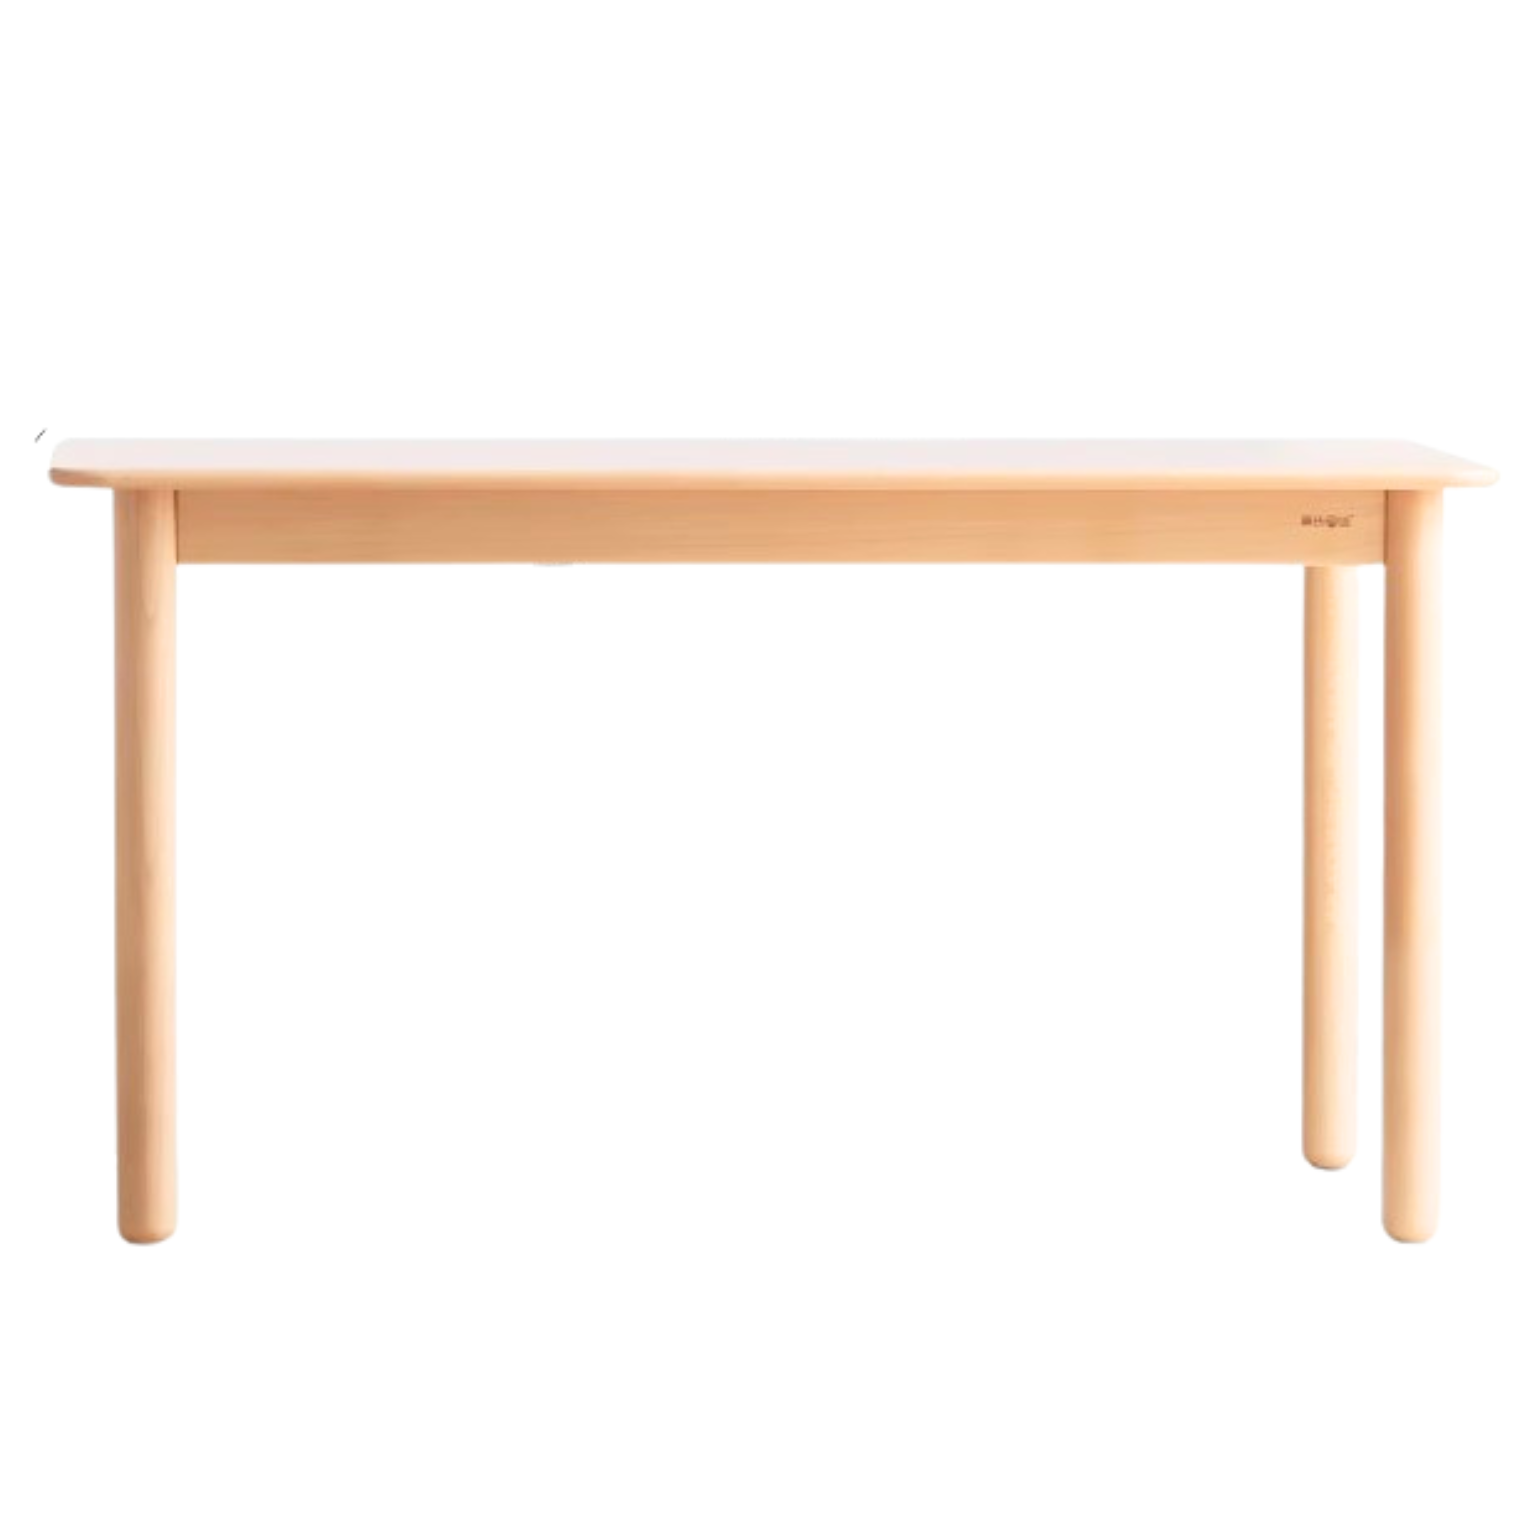 Beech solid wood dining table -